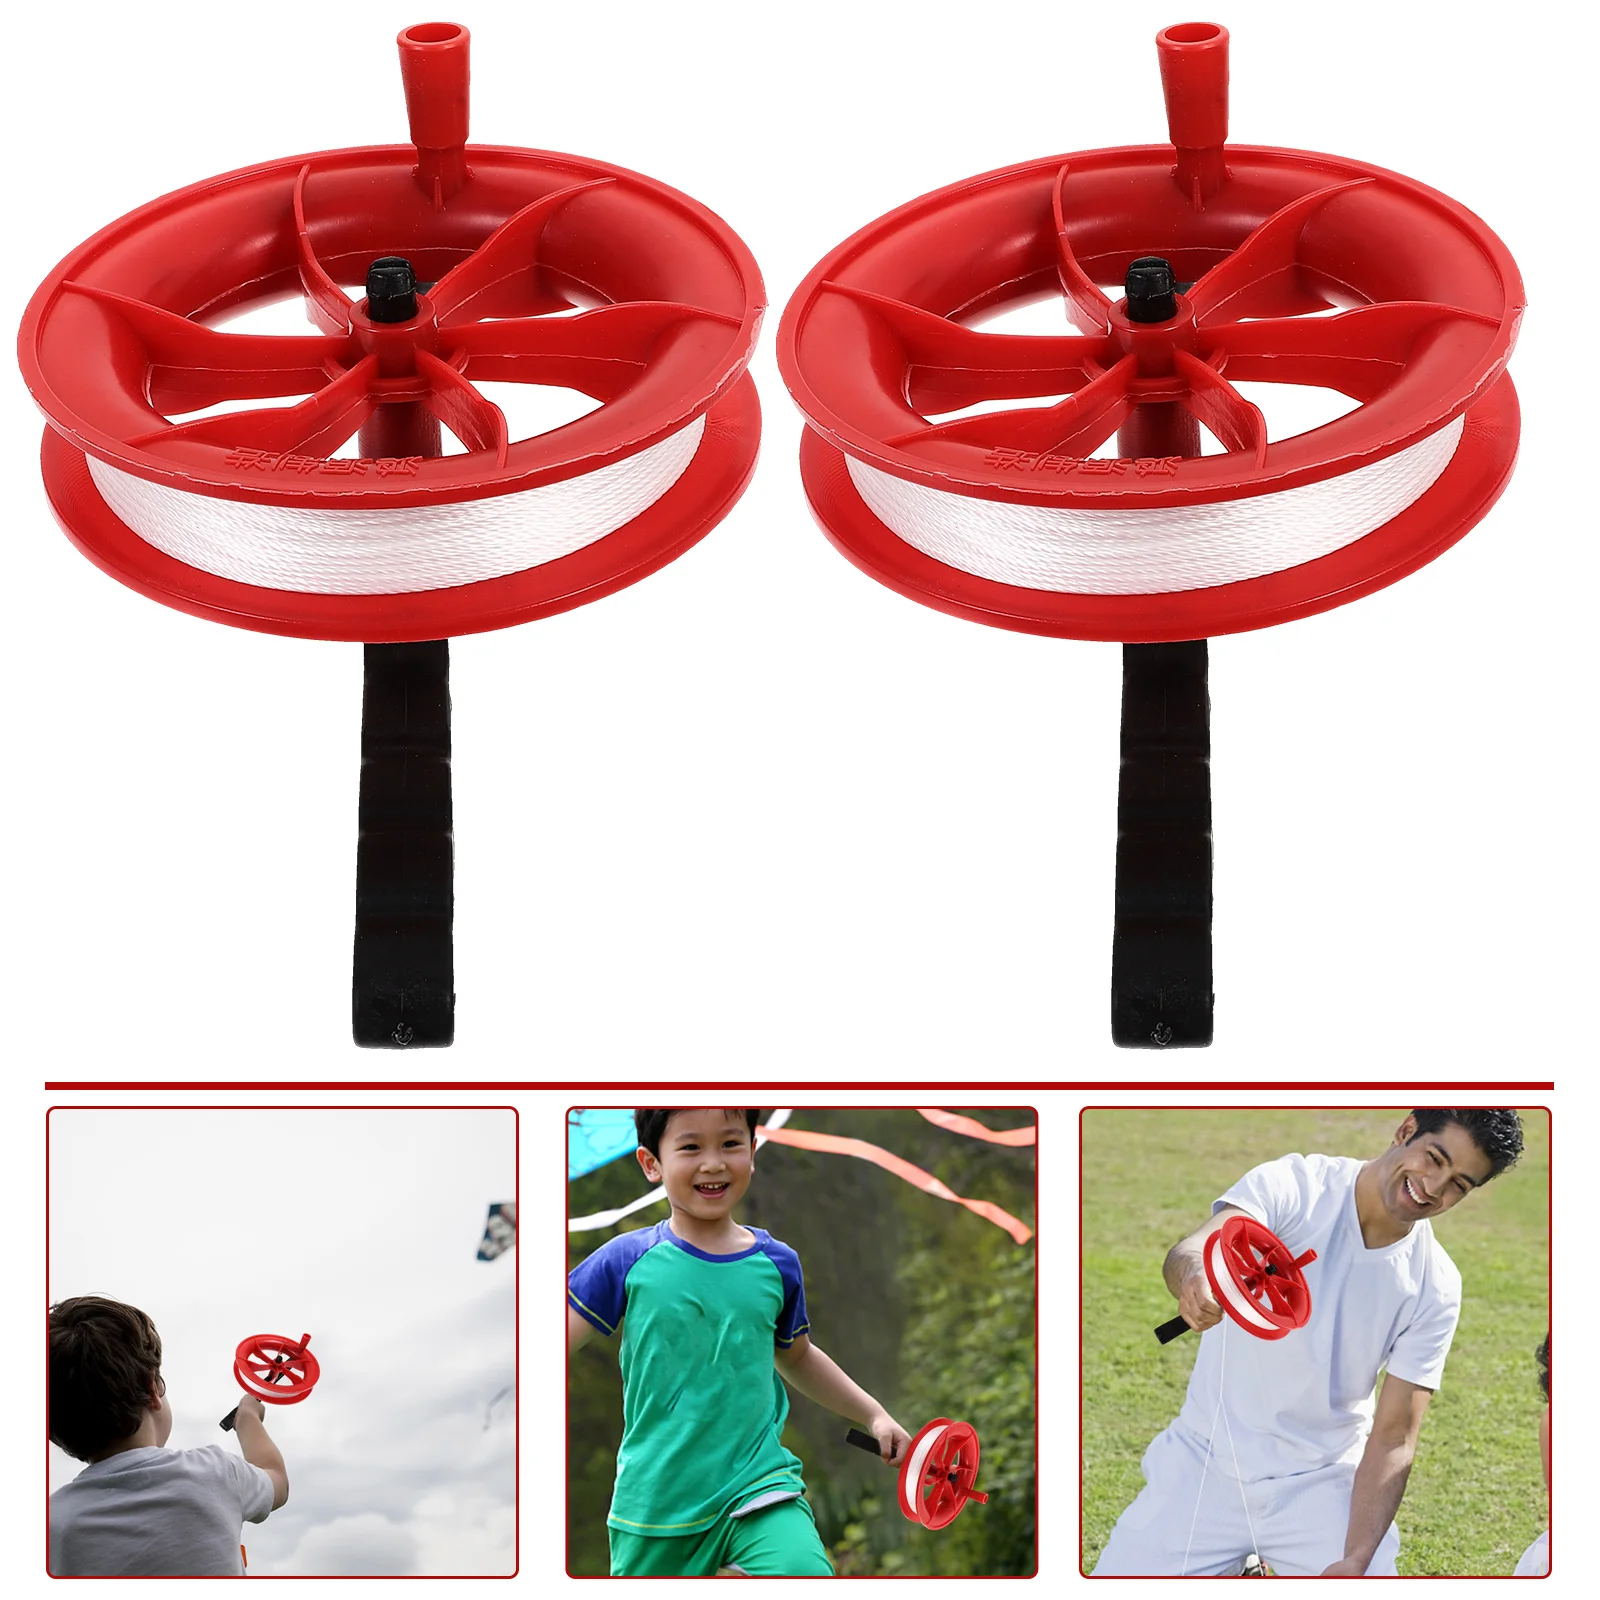 

2pcs Kite Reel Winder with 100m String for Flying Kites Outdoor Kite Accessories Wooden